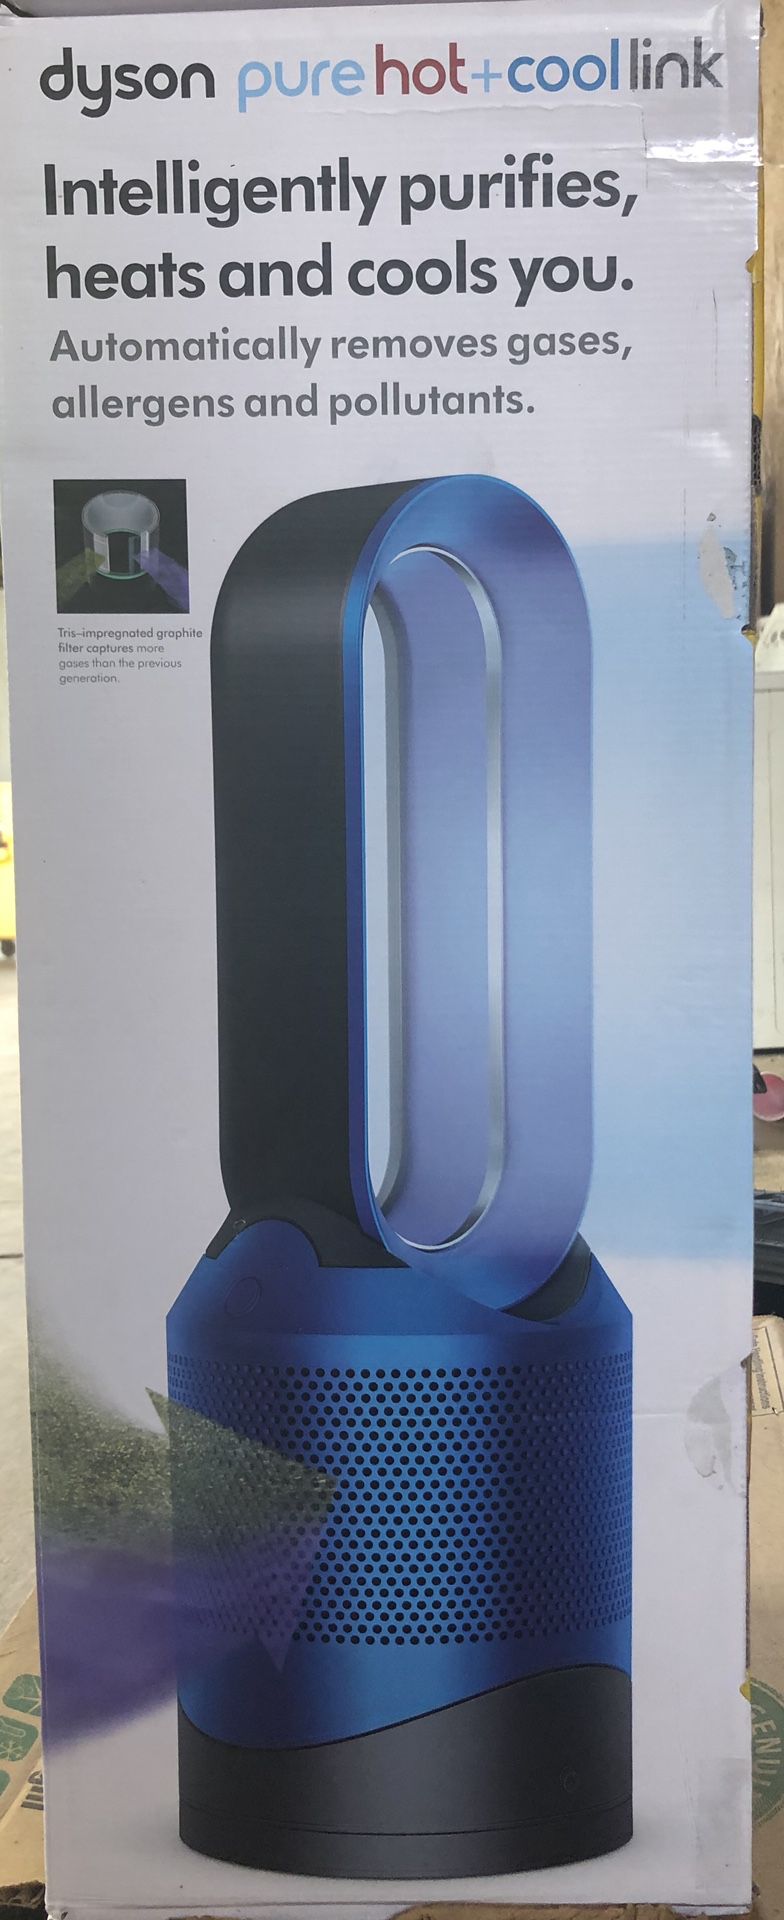 Dyson pure hot + cool link intelligently purifies, heats & cools you